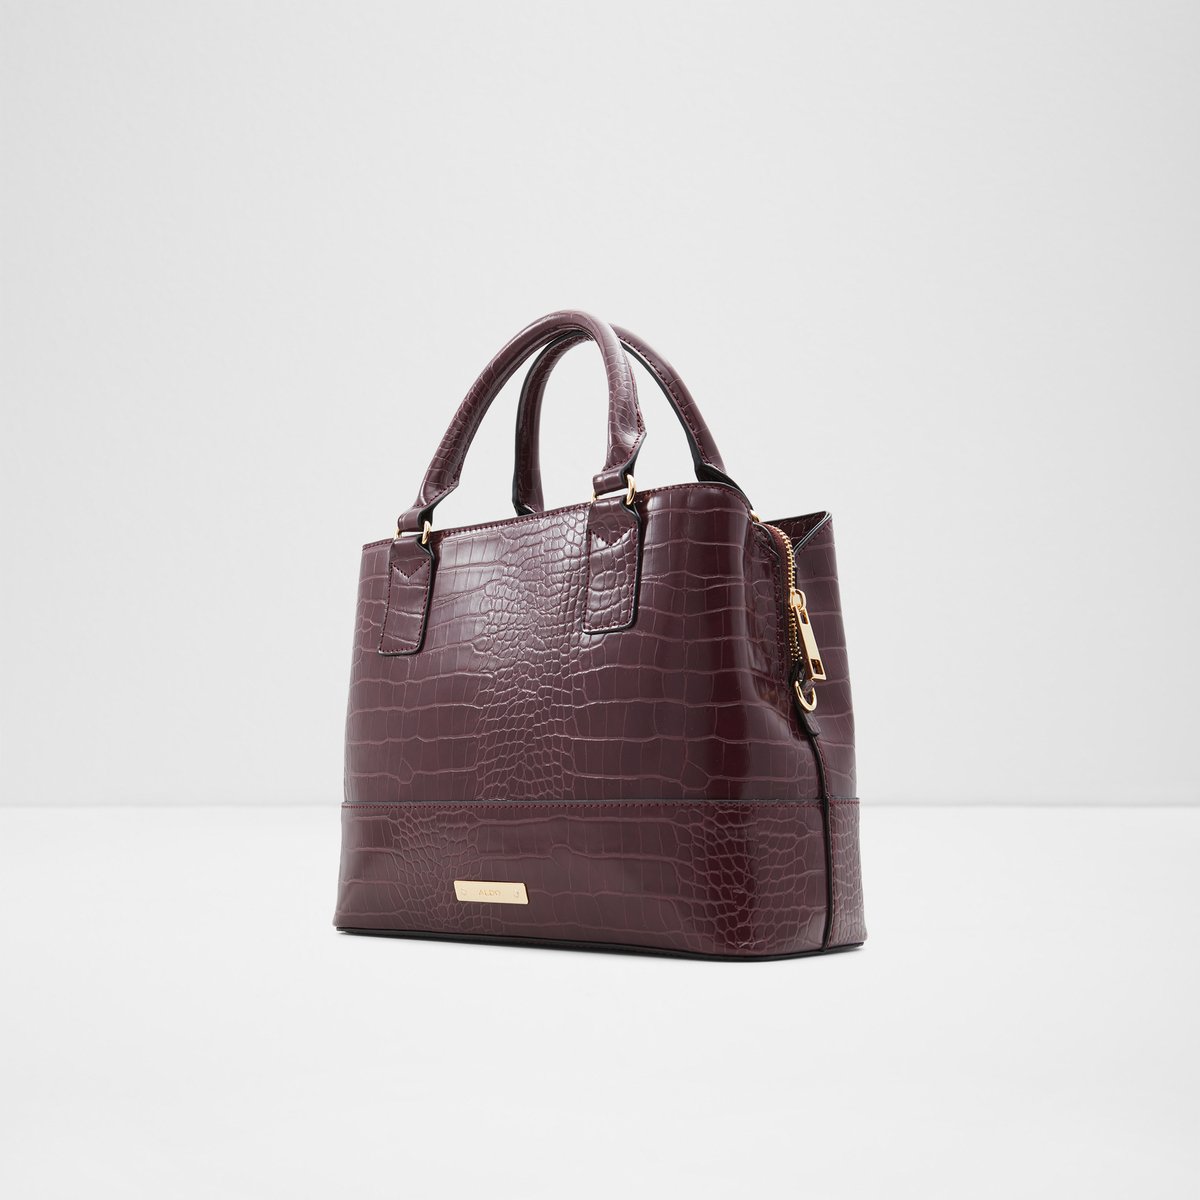 ALDO Checked Tote Bag with Detchable Strap For Women (Maroon, OS)